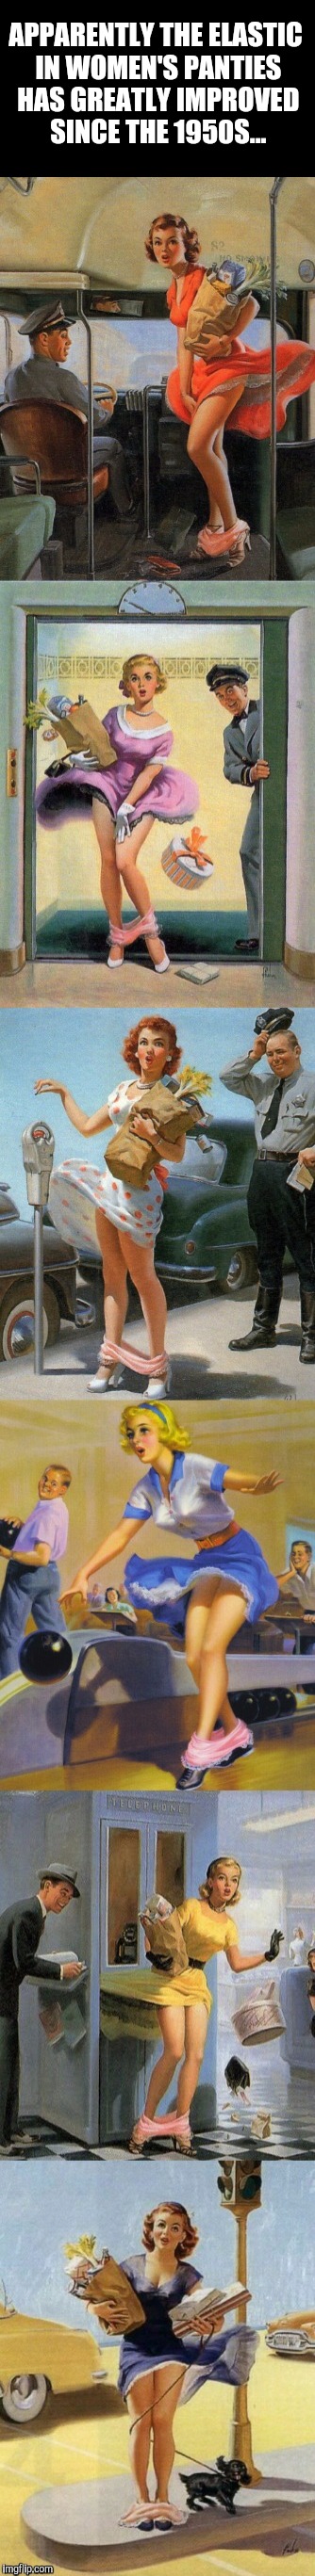 Ah, the good old days  |  APPARENTLY THE ELASTIC IN WOMEN'S PANTIES HAS GREATLY IMPROVED SINCE THE 1950S... | image tagged in 1950s,pinup art,jbmemegeek,memes,pretty ladies | made w/ Imgflip meme maker